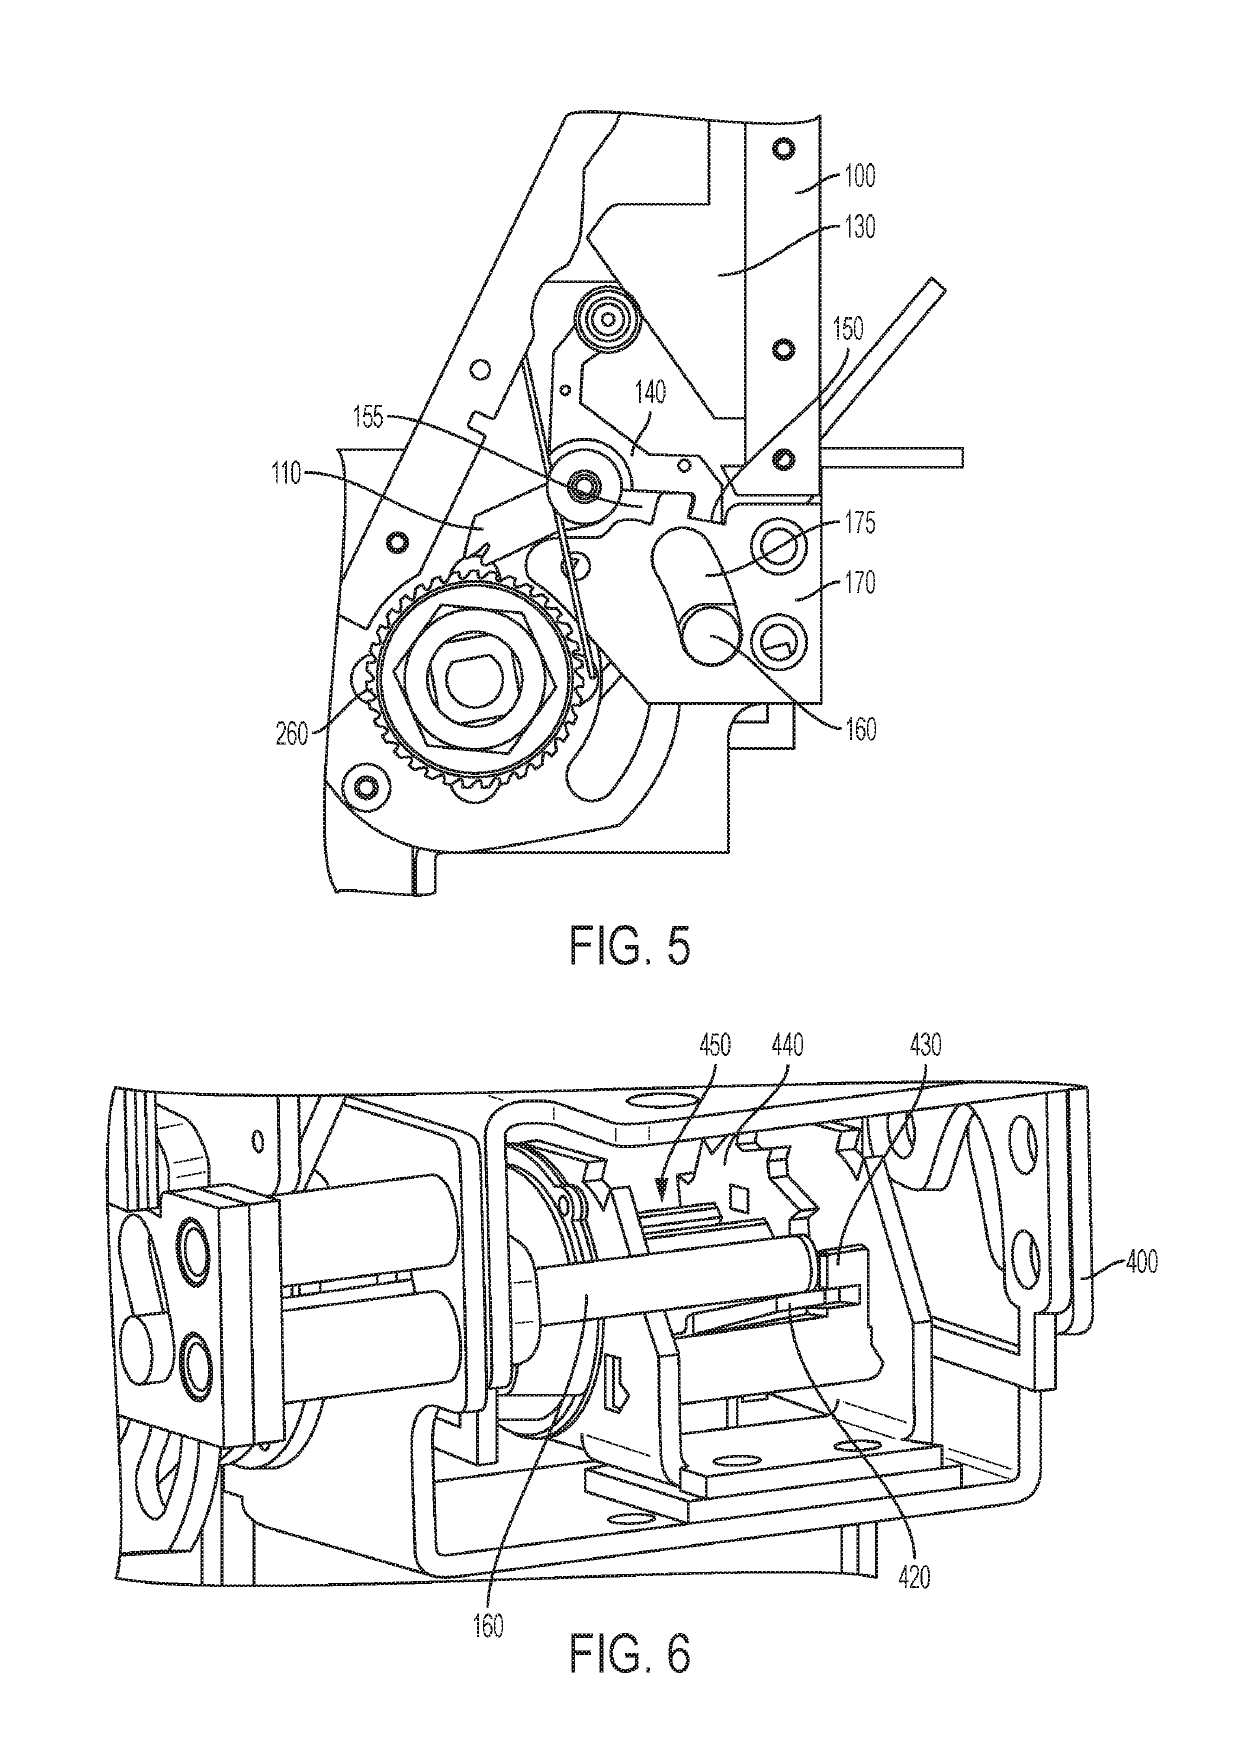 Mobility restraint device tensioner